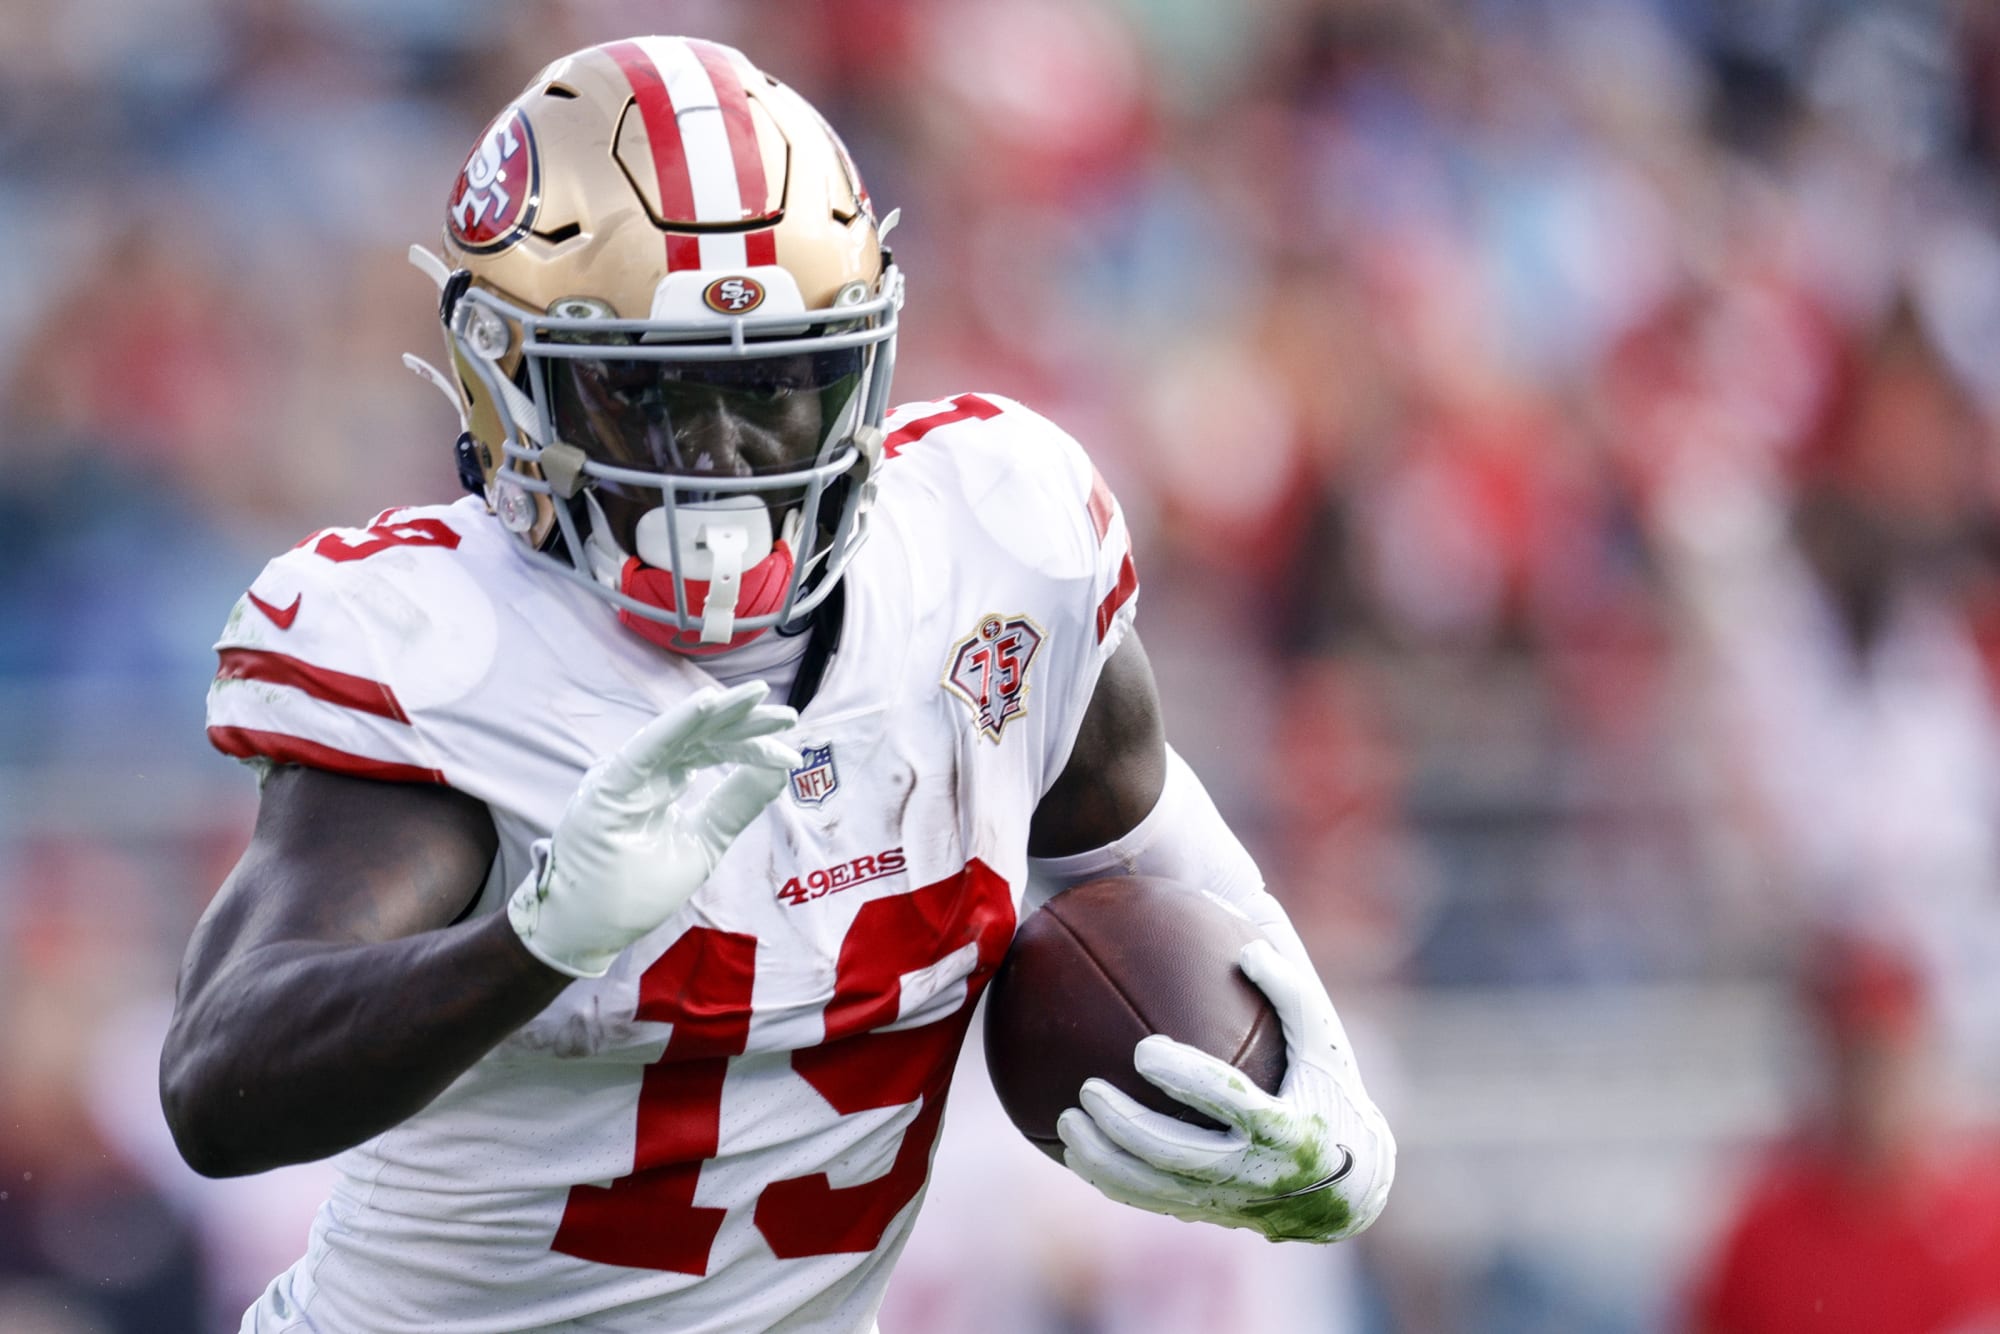 Predicting who receives 49ers player awards for 2022 season